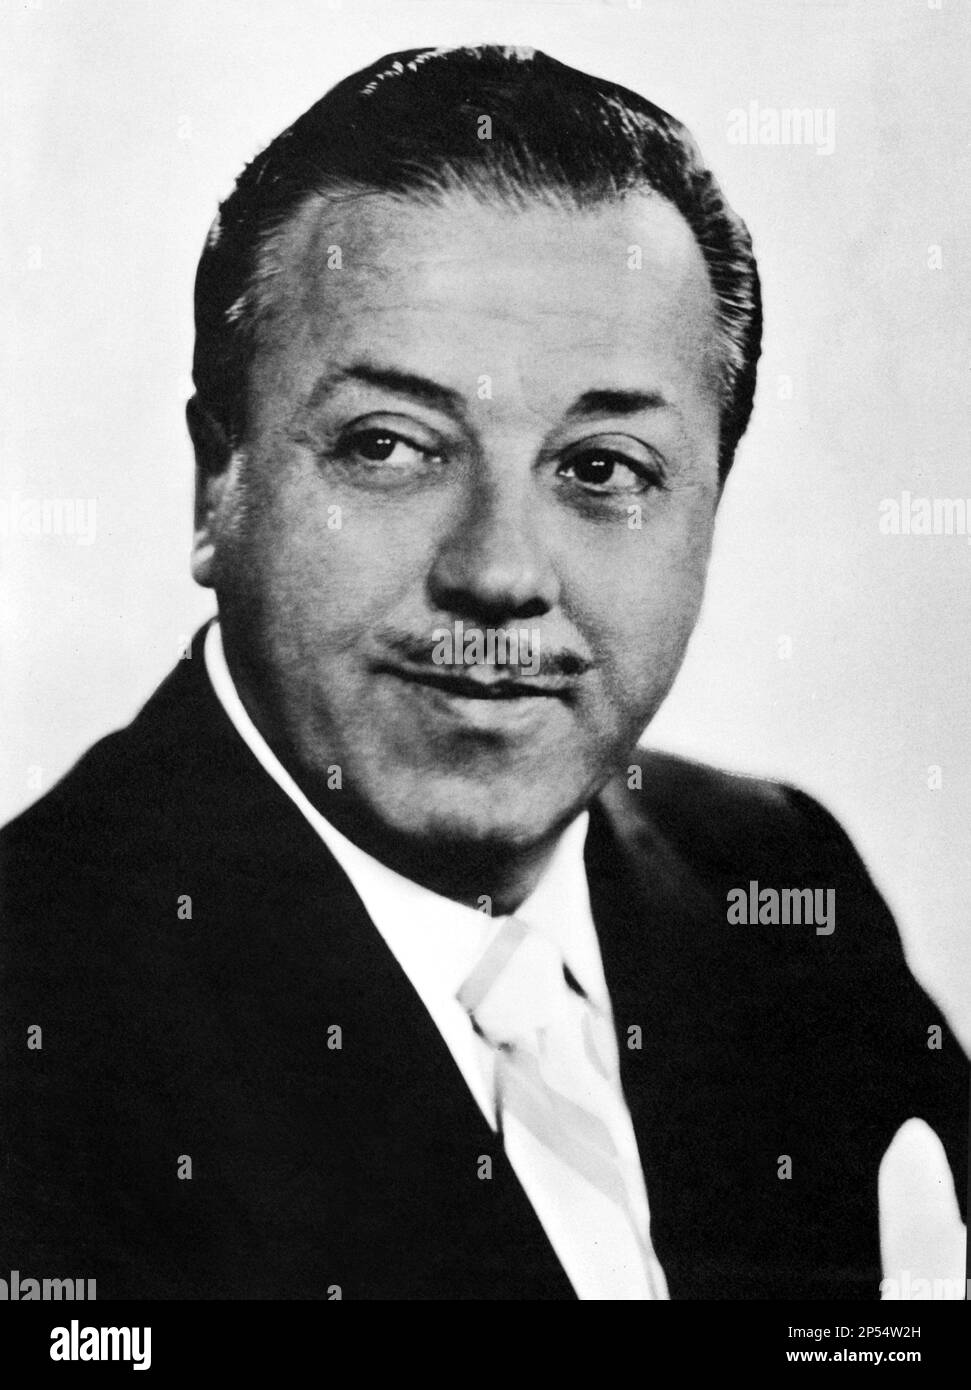 1940 c, USA  : The  italian silent movie comedy actor and director  MONTY BANKS ( Mario Bianchi , 1897 - 1950 ) in Hollywood . Married in 1940 with the celebrated british comedienne and music hall singer Dame GRACIE FIELDS ( 1898 - 1979 ) . Howner of Capri famous swimmingpool restaurant LA CANZONE DEL MARE , Marina Piccola .  - CINEMA MUTO  - portrait - ritratto - smile - sorriso - bow tie - cravatta - papillon  ----  Archivio GBB Stock Photo